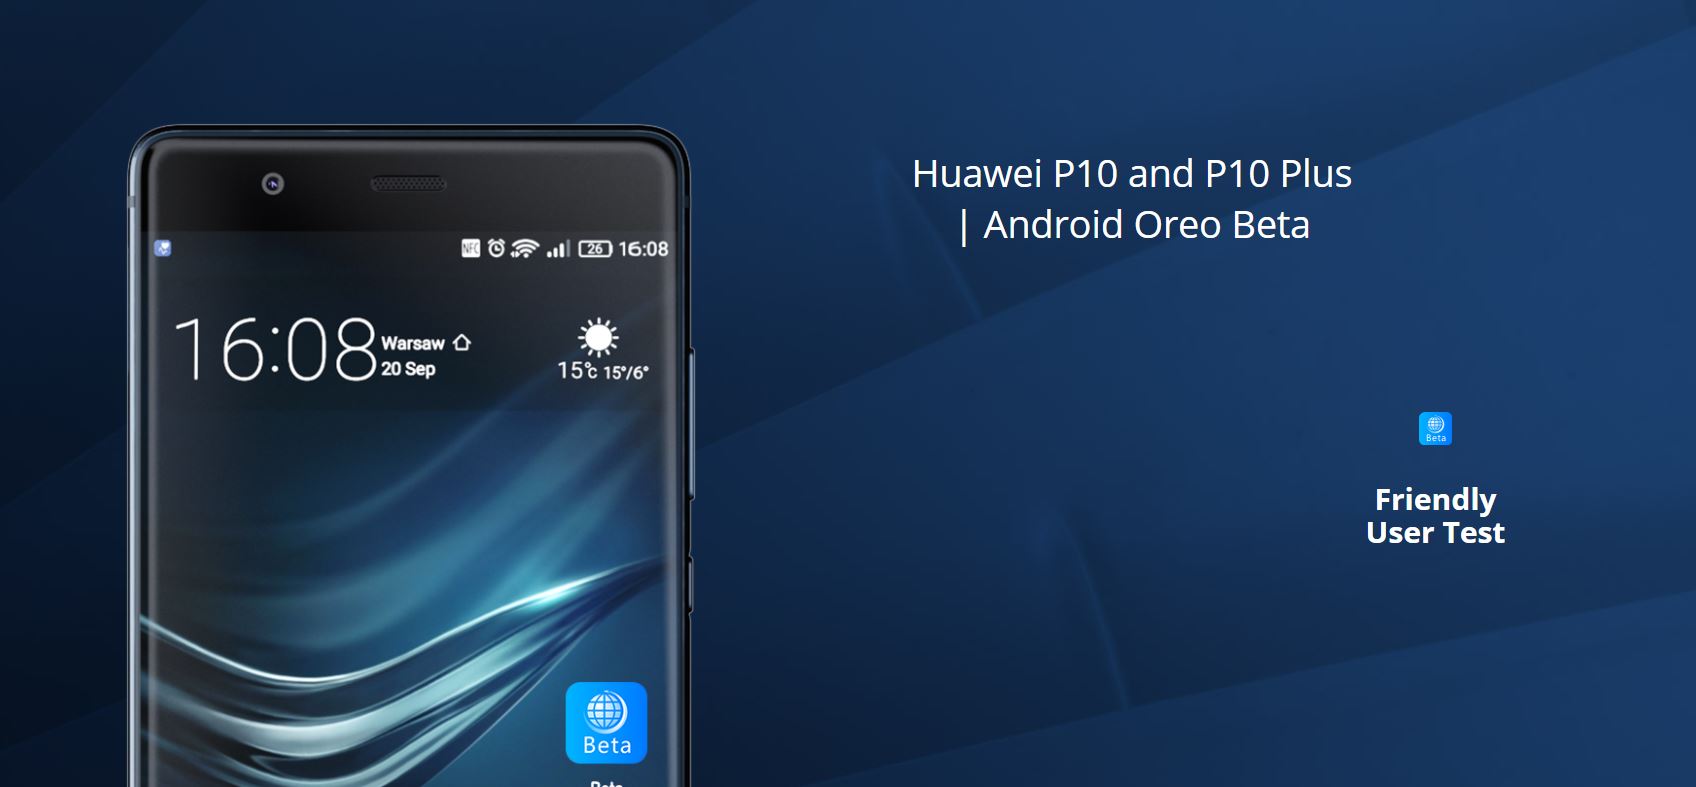 Android Oreo Beta for Huawei P10 and P10 Plus is live now 1